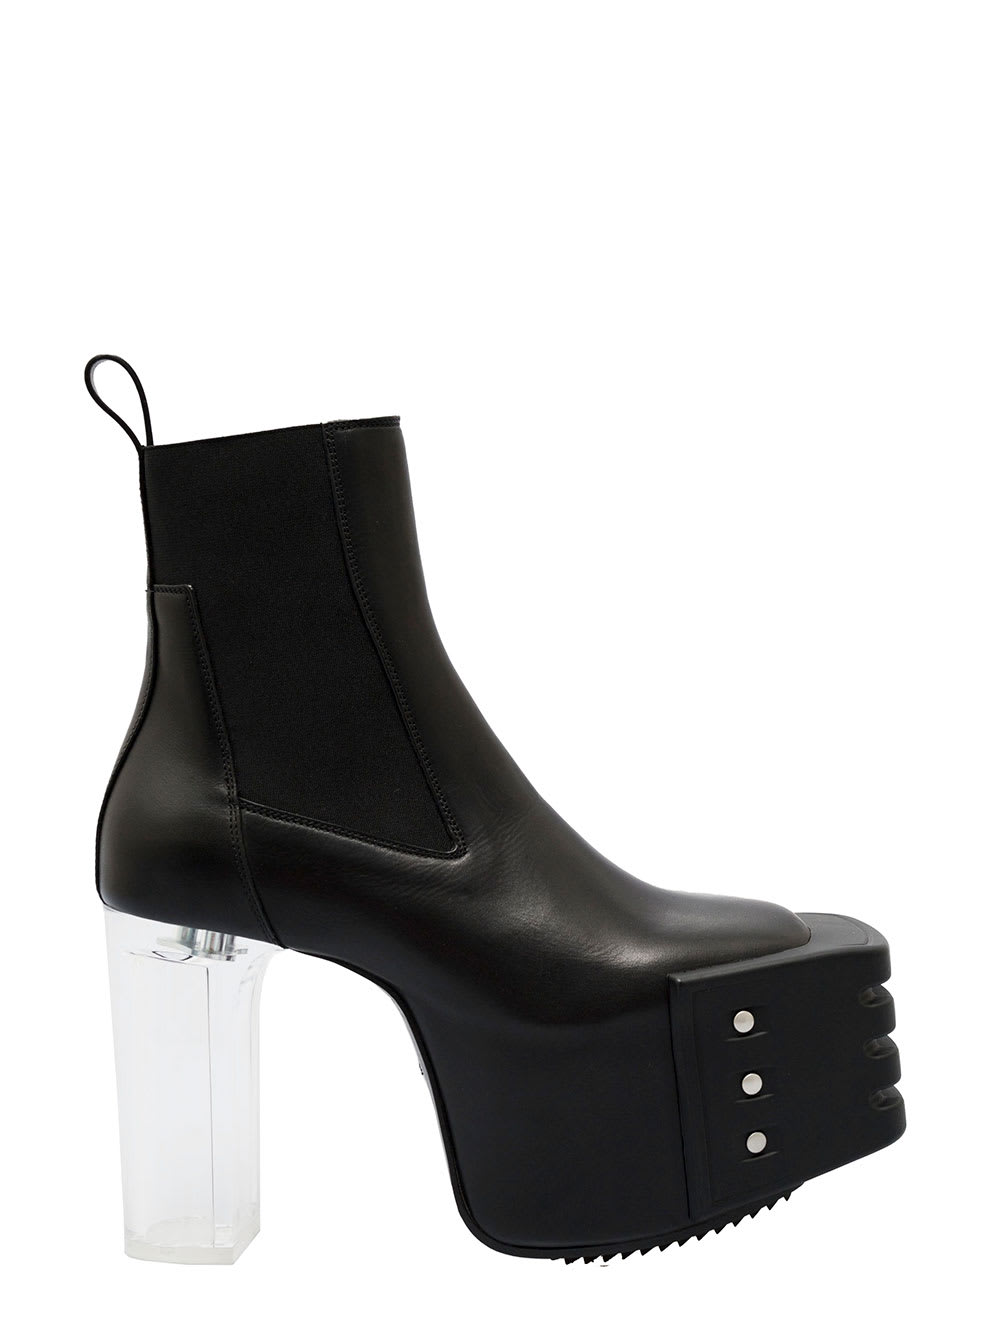 RICK OWENS BLACK LEATHER BOOTS WITH PLATFORM AND SHEER HEEL WOMAN